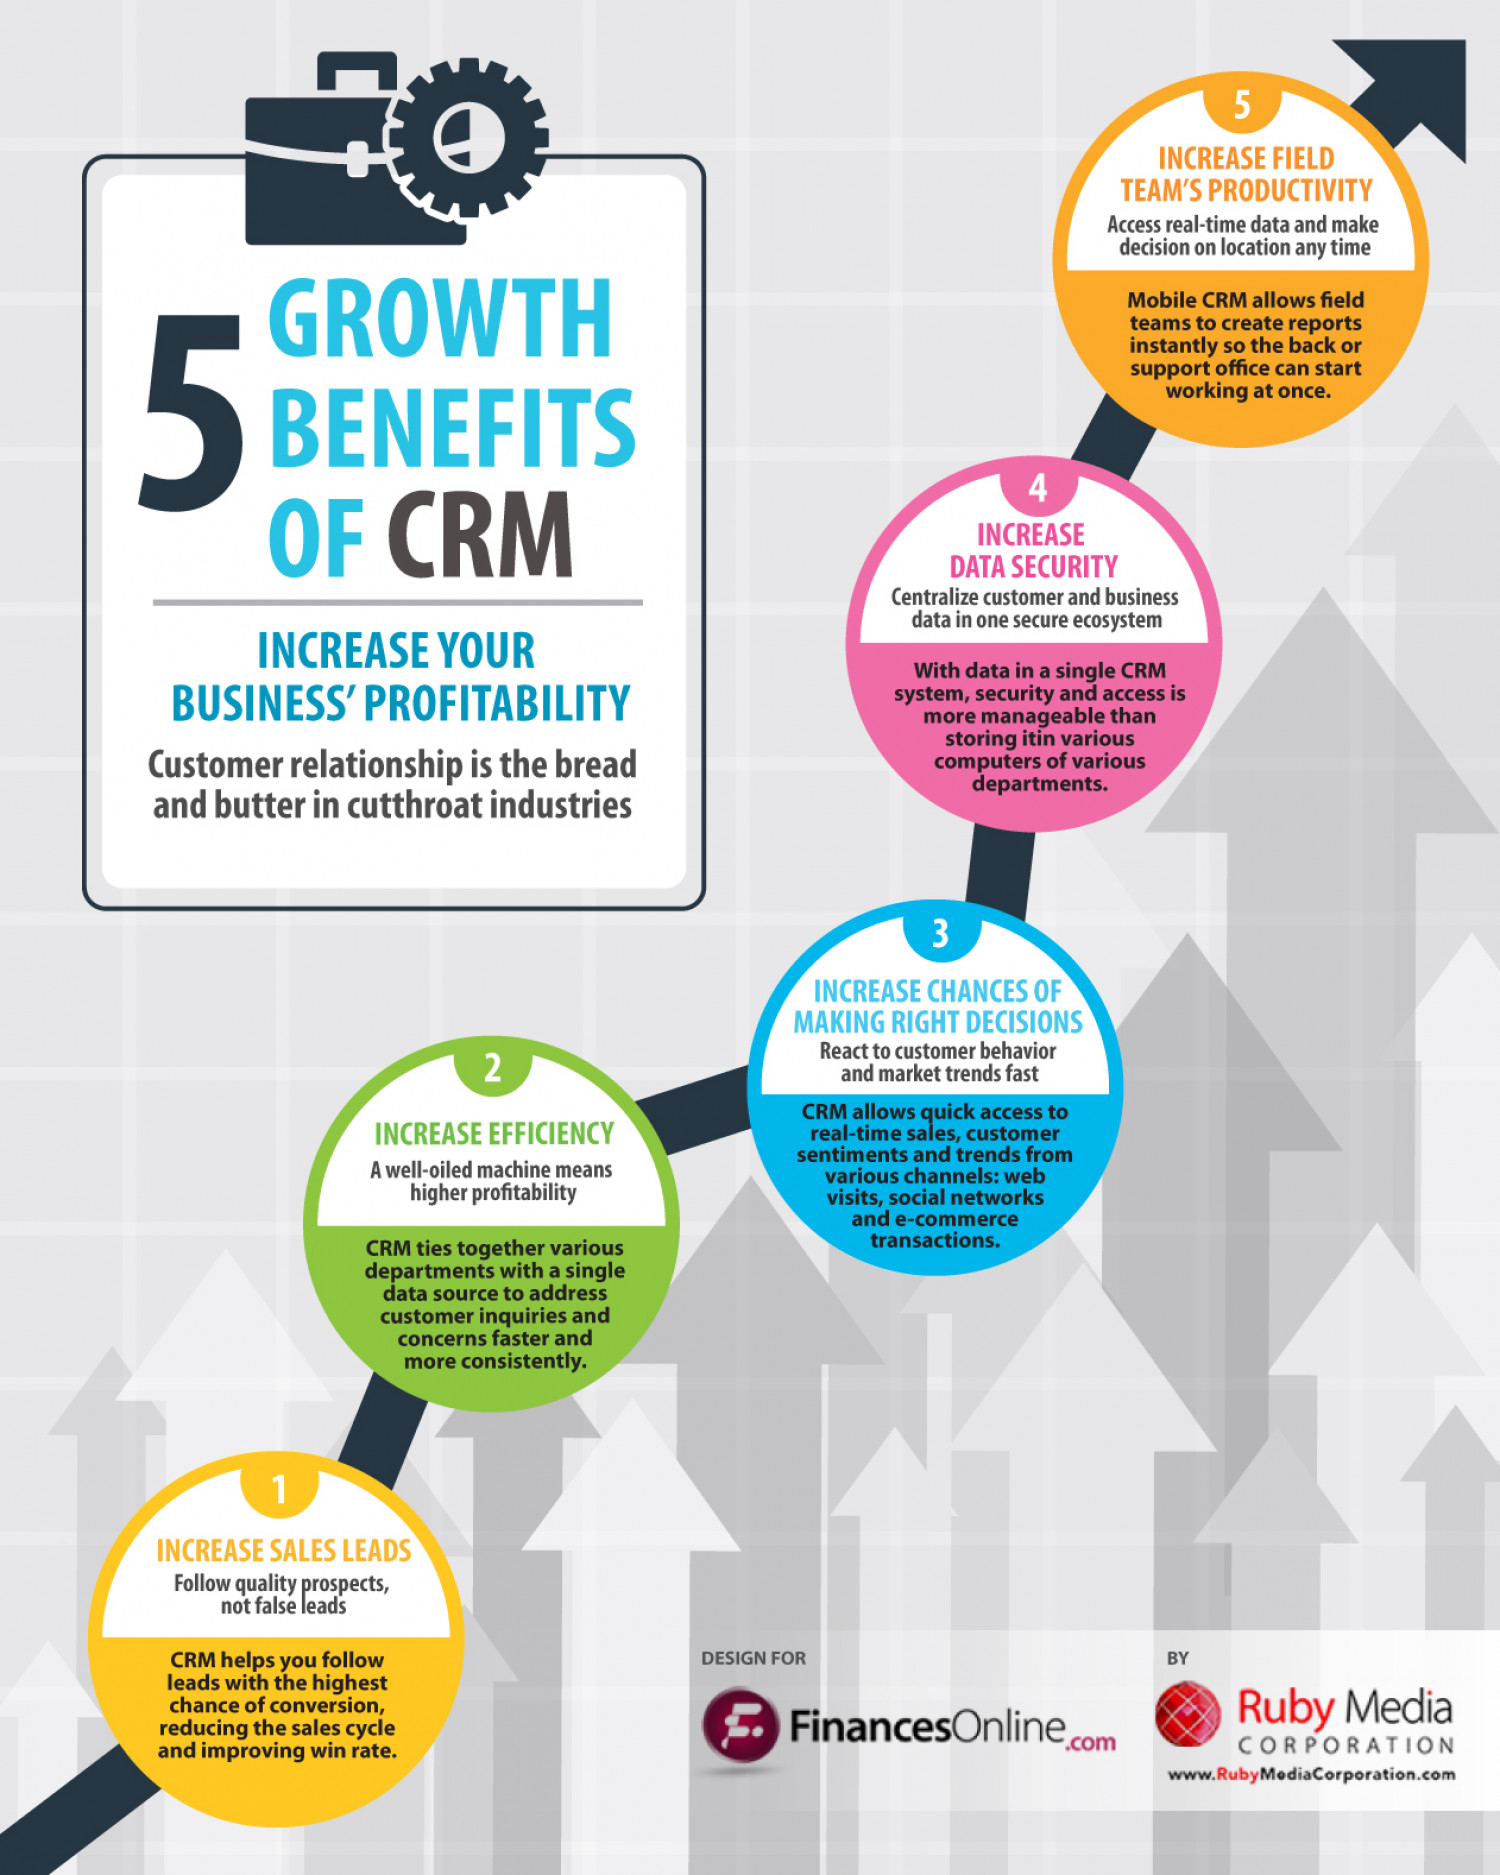 5 Growth Benefits of CRM Infographic